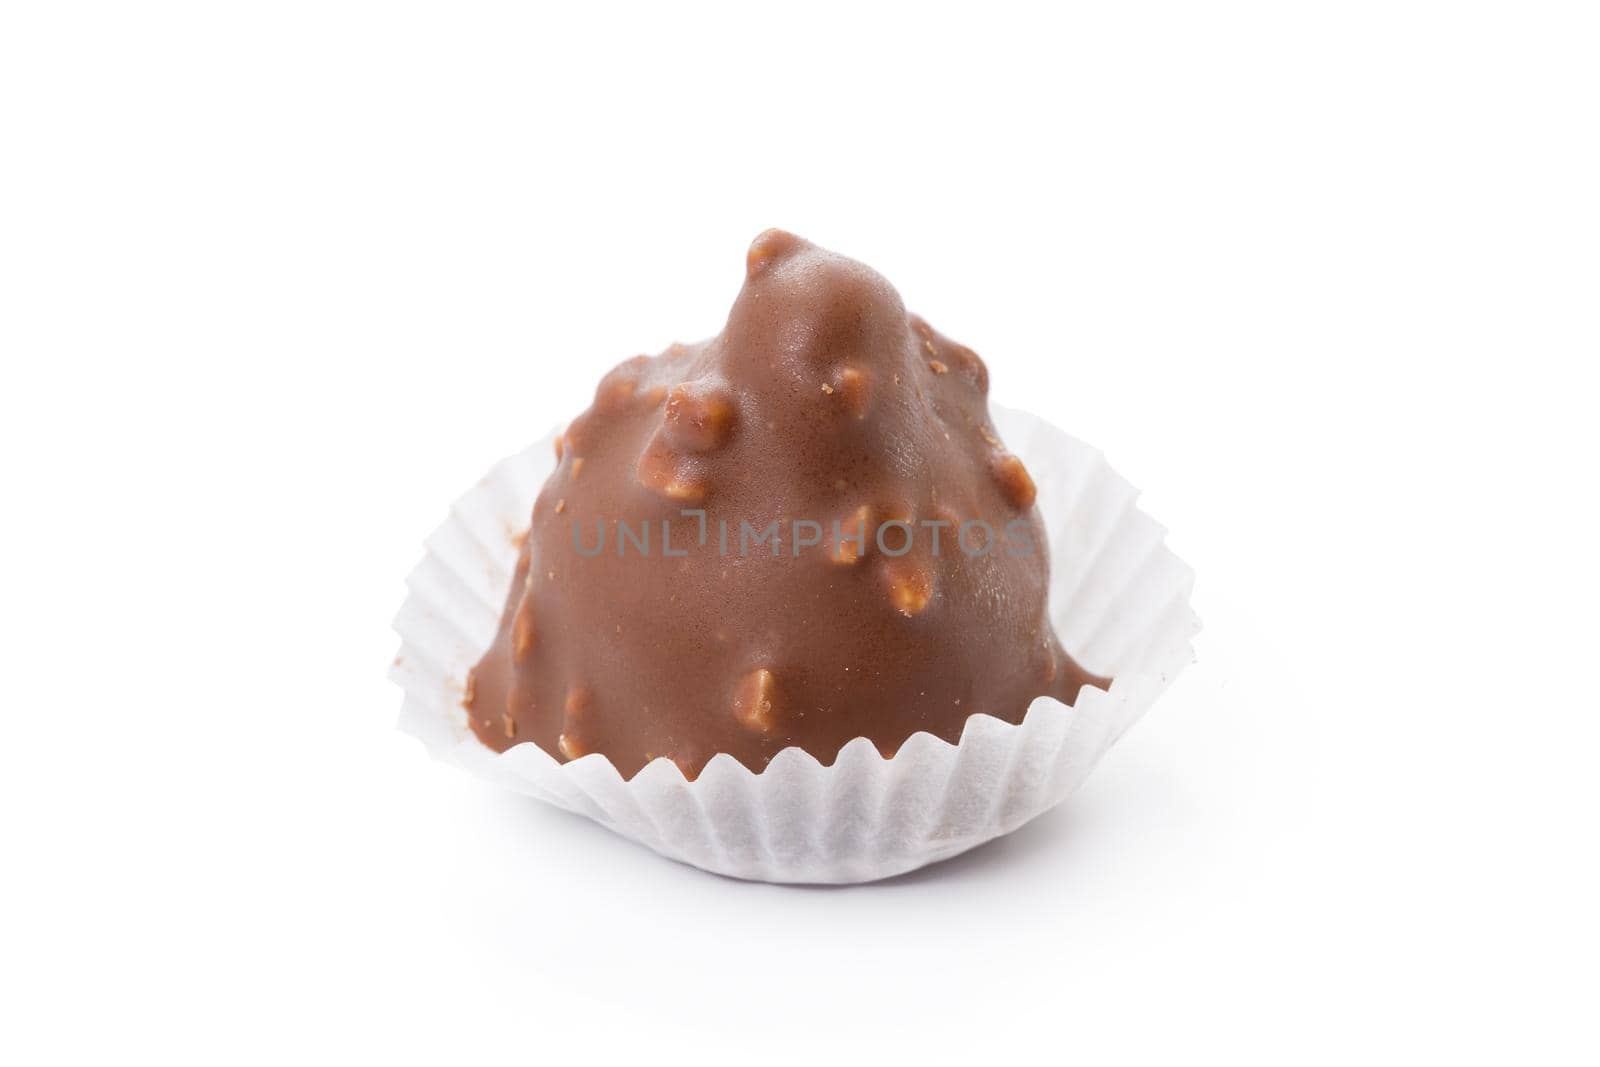 One homemade chocolate candy isolated on white background